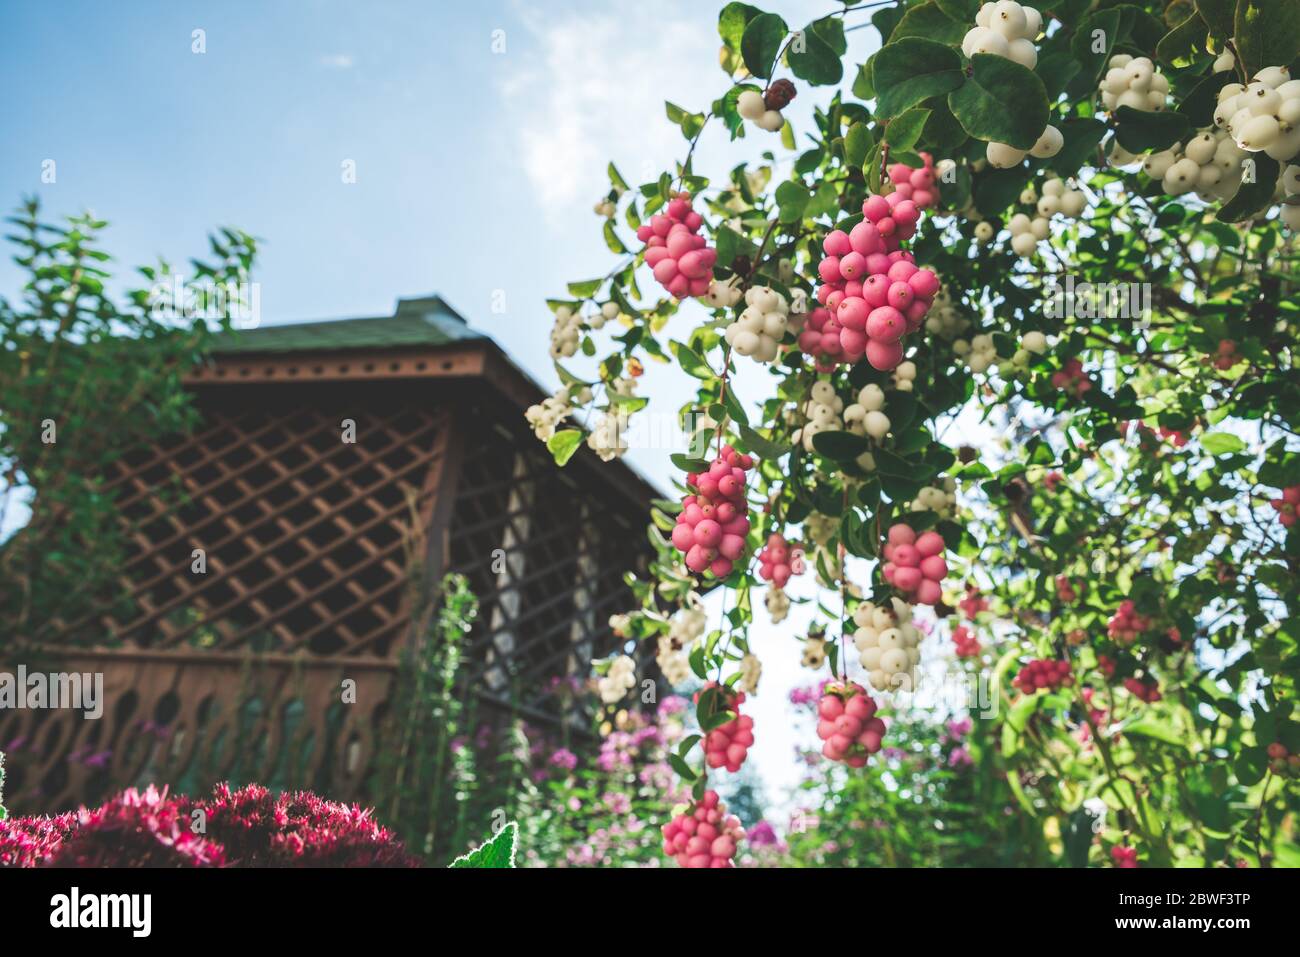 Summer garden in sunshine with blooming Symphoricarpos plant, known as snowberry, waxberry, or ghostberry Stock Photo